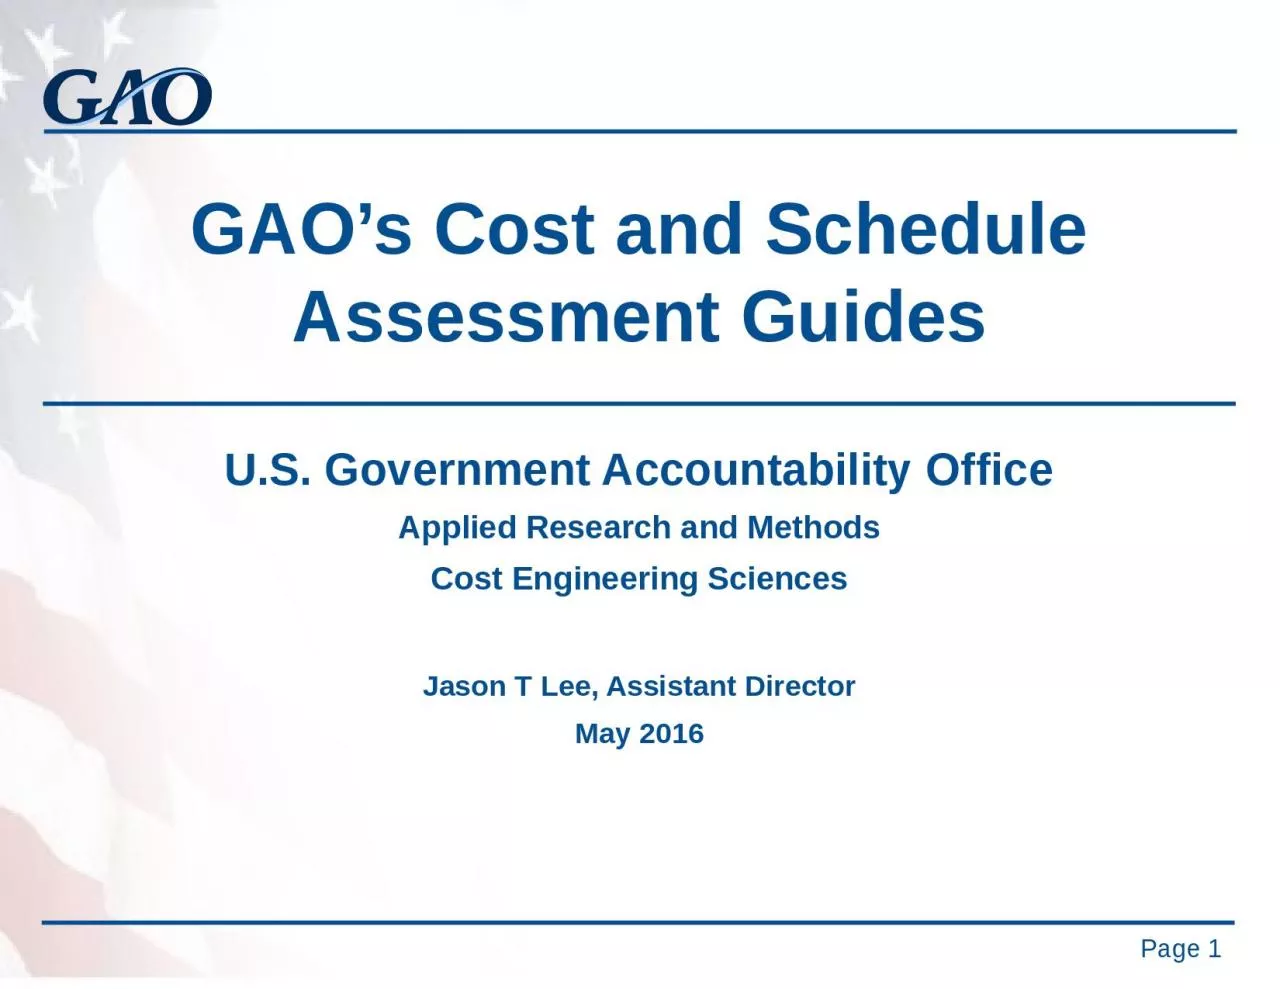 GAO’s Cost and Schedule Assessment Guides